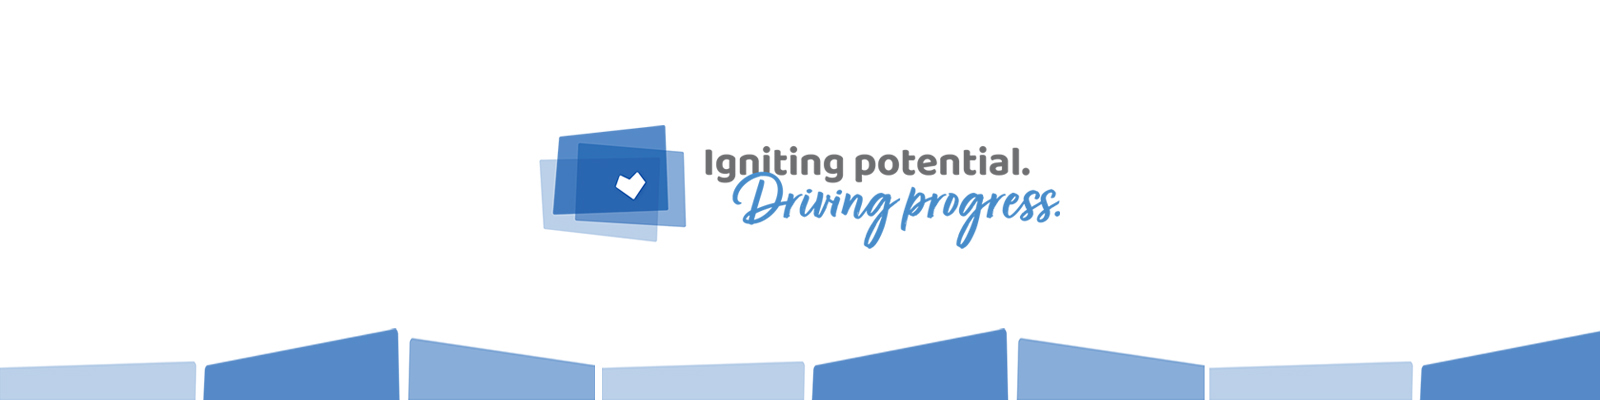 Igniting potential. Driving change.